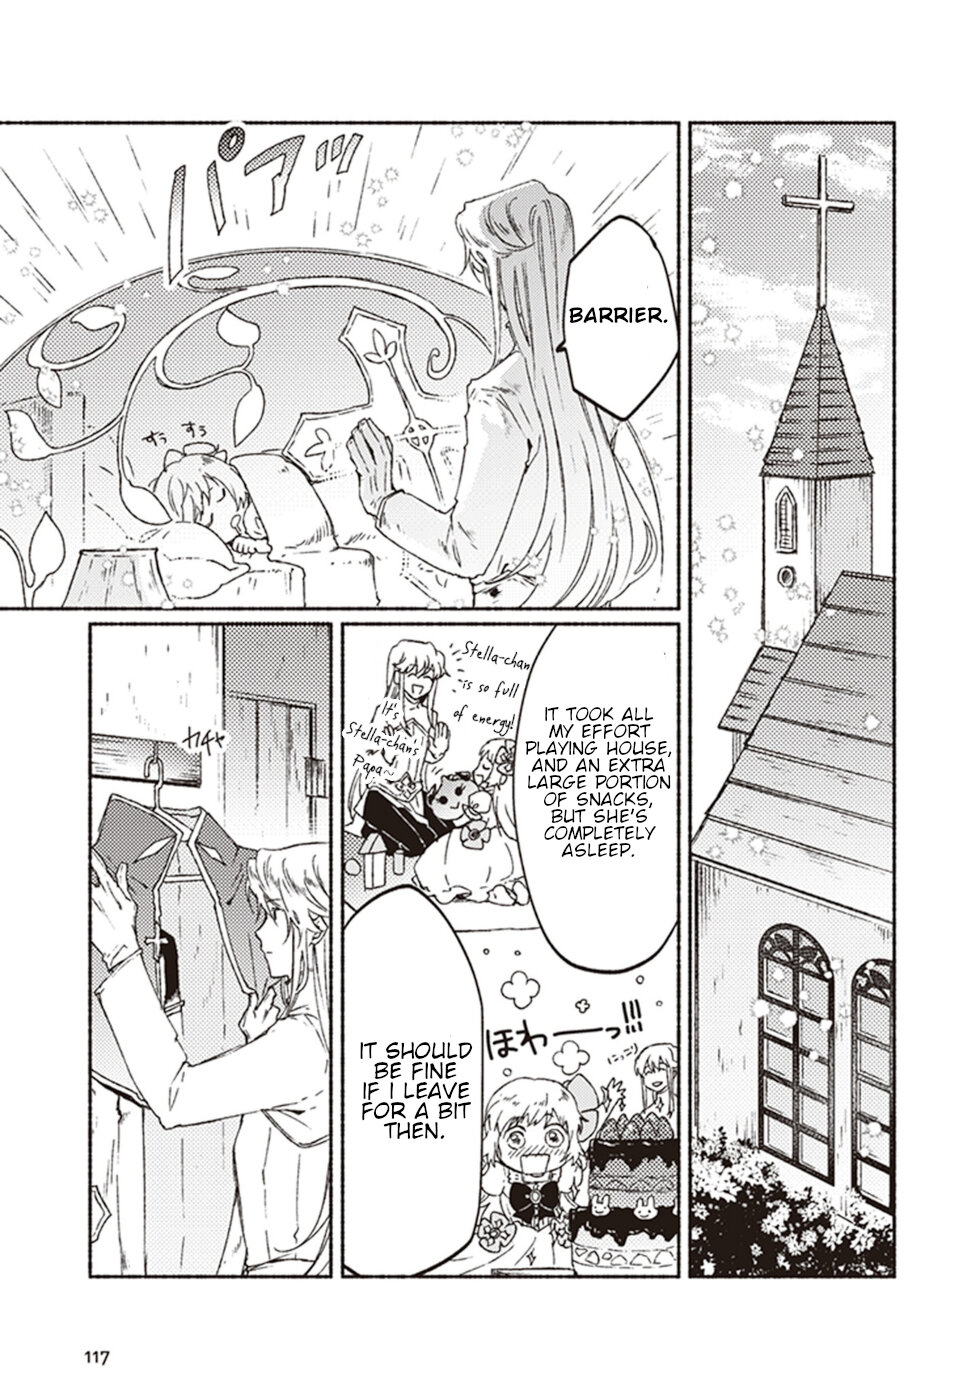 The Church in Front of the Devil’s Castle Vol. 2 Ch. 8 In A Moment, Desire To Protect, Once Again